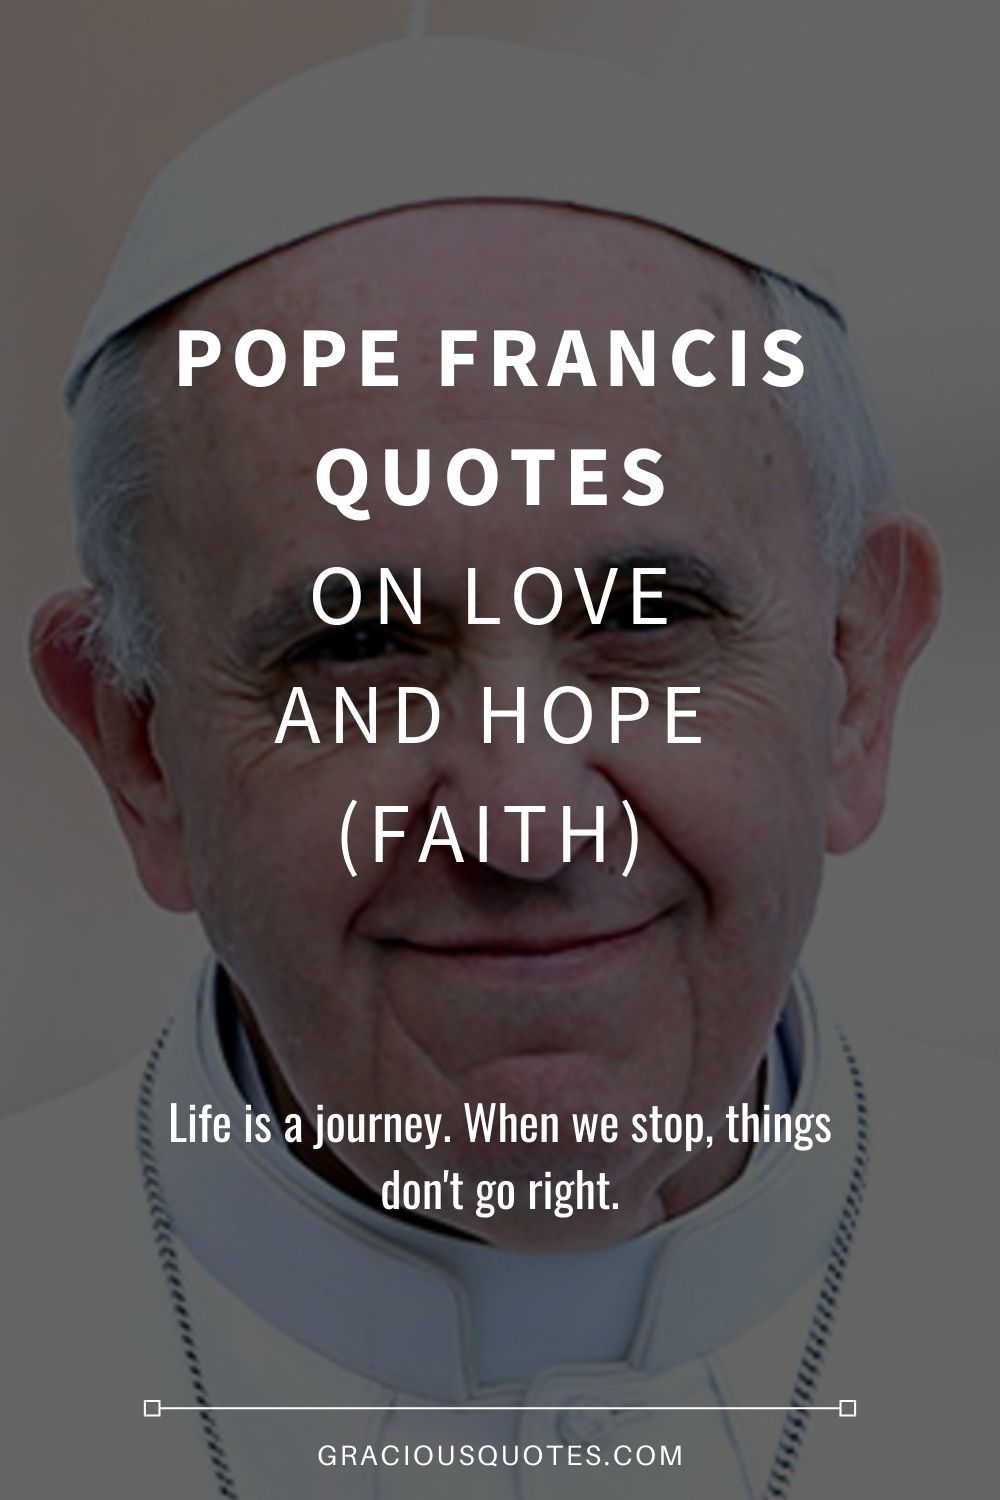 Pope Francis Quotes on Love and Hope (FAITH) - Gracious Quotes